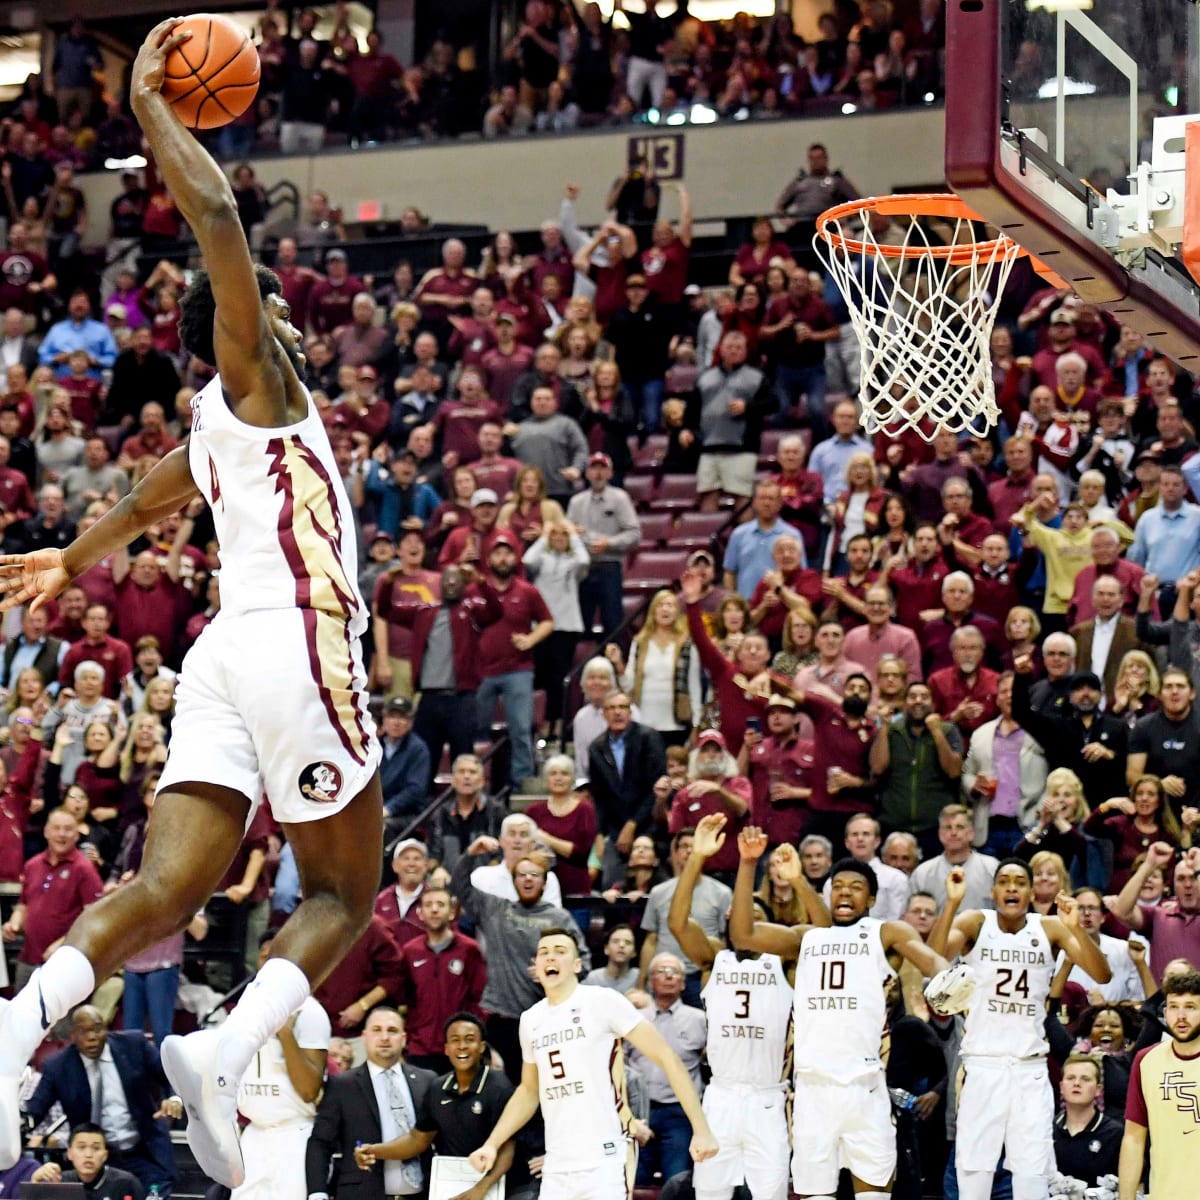 Florida State's Devin Vassell declares for the NBA Draft